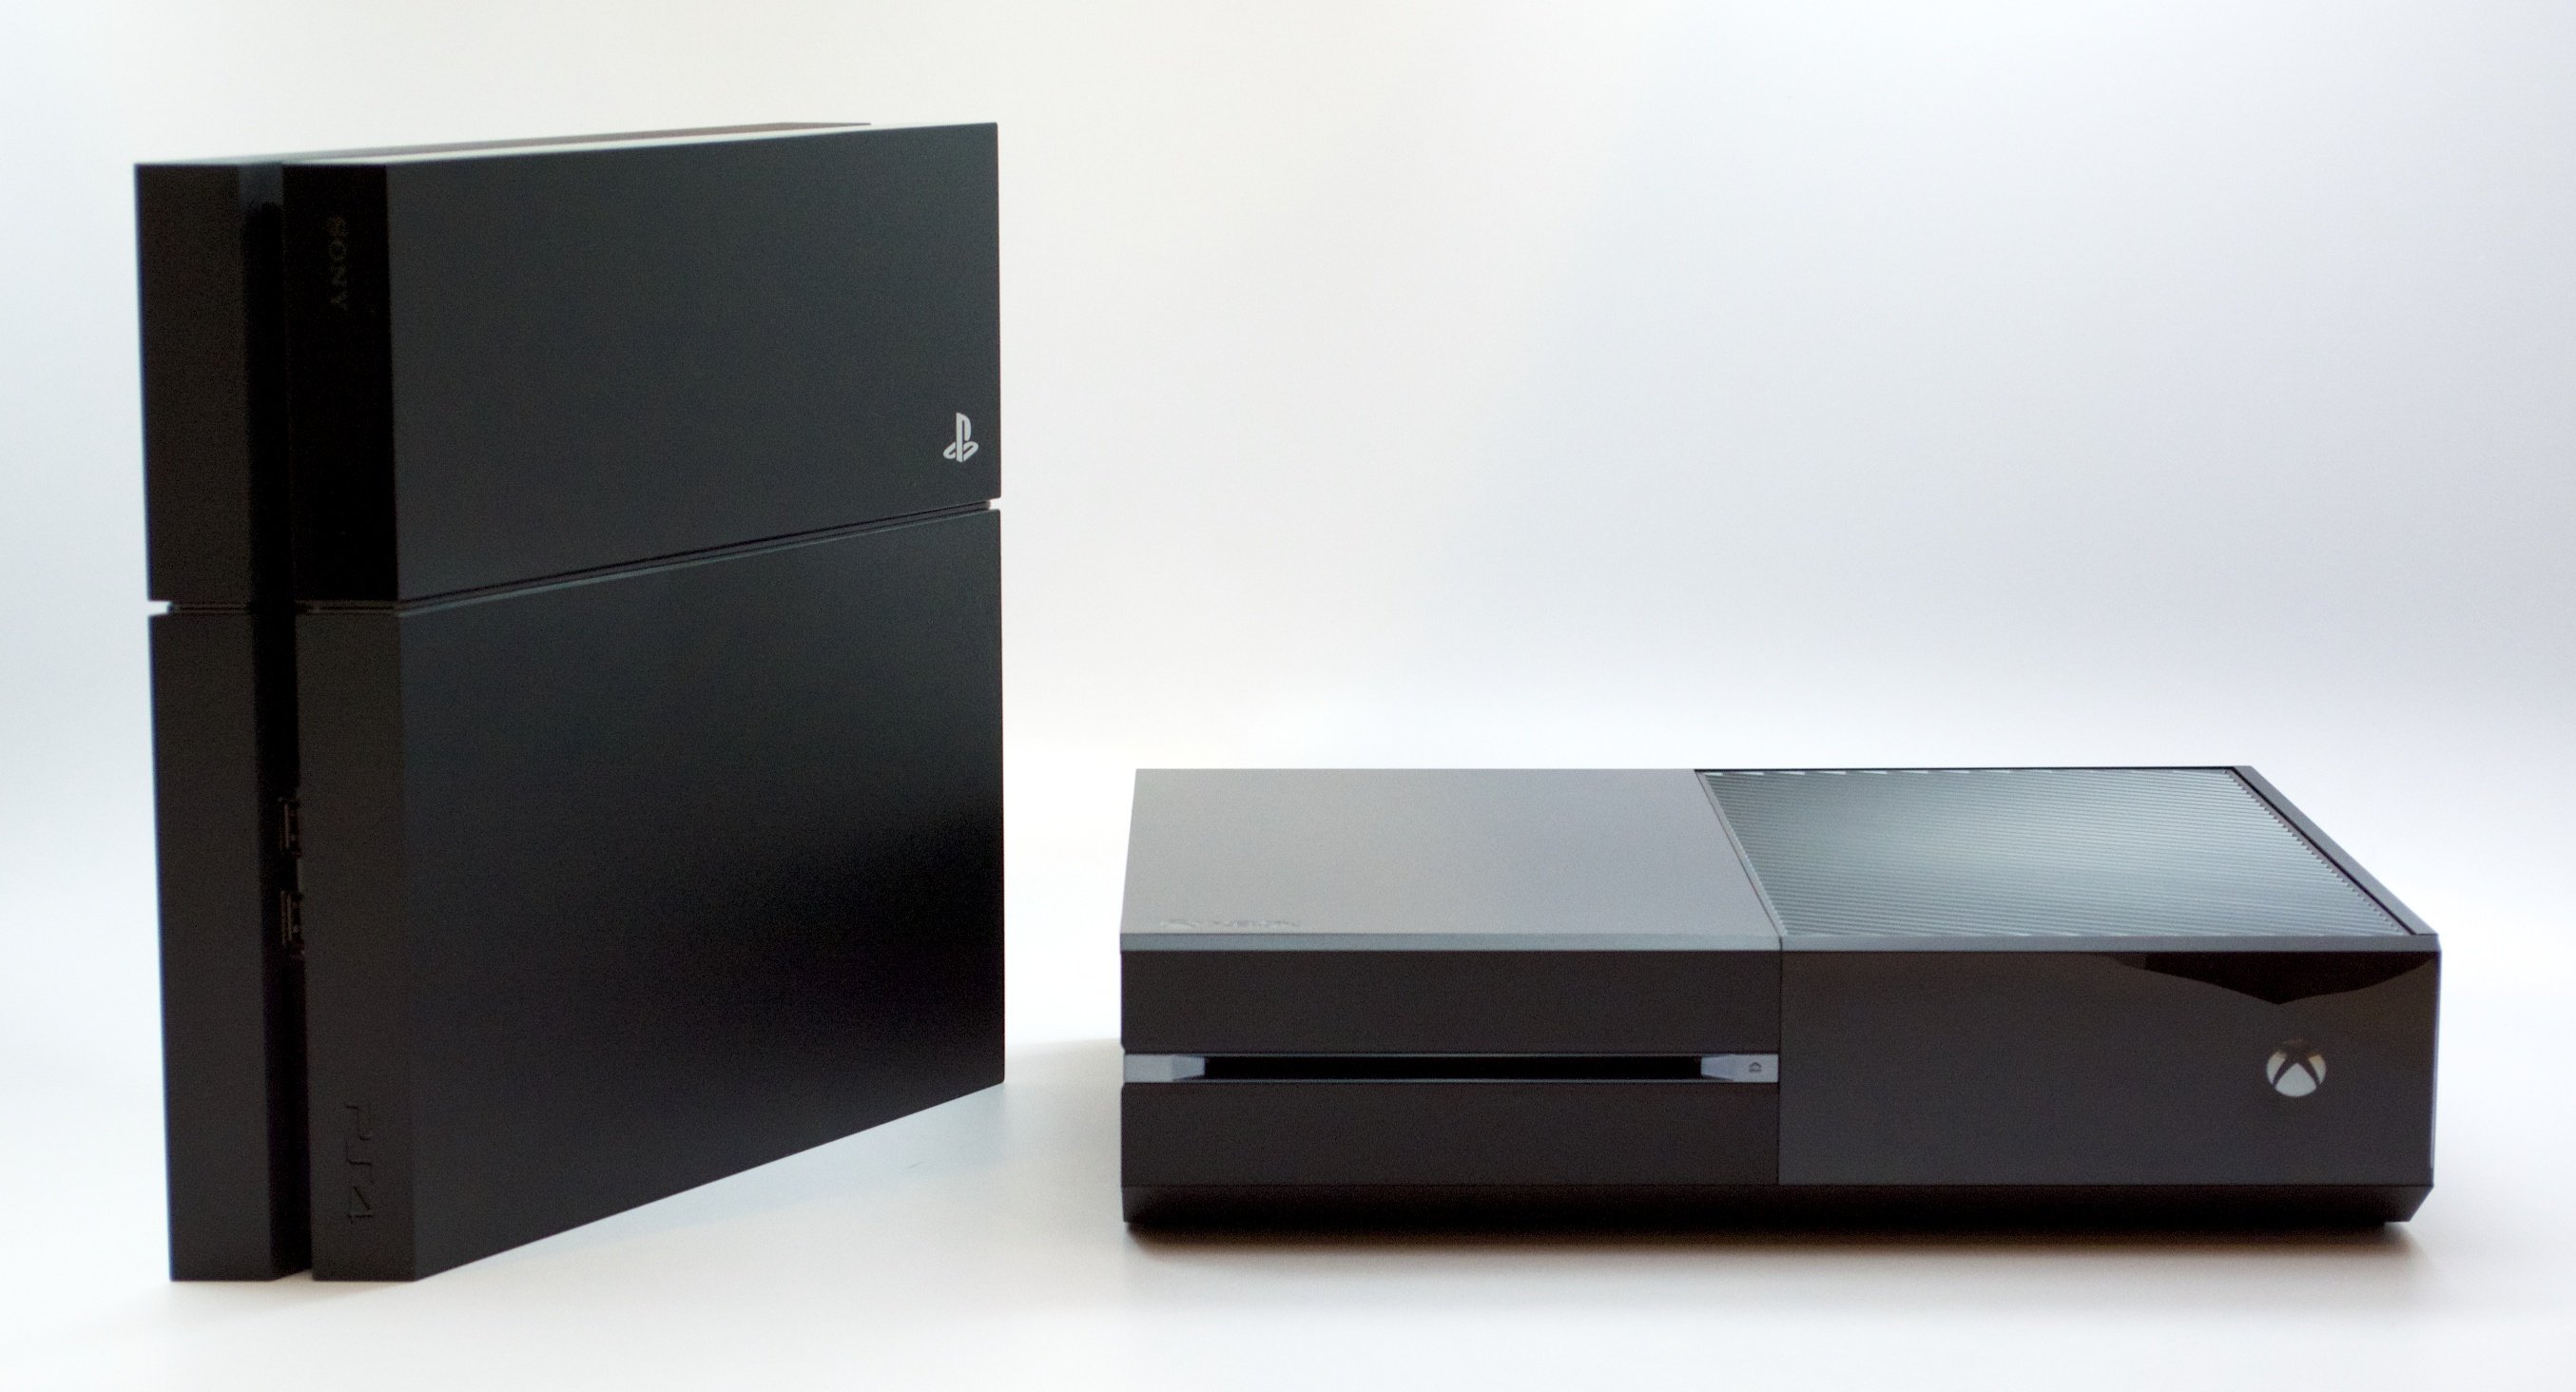 PS4 vs Xbox one performance is tough to pick a winner in real world use right now.